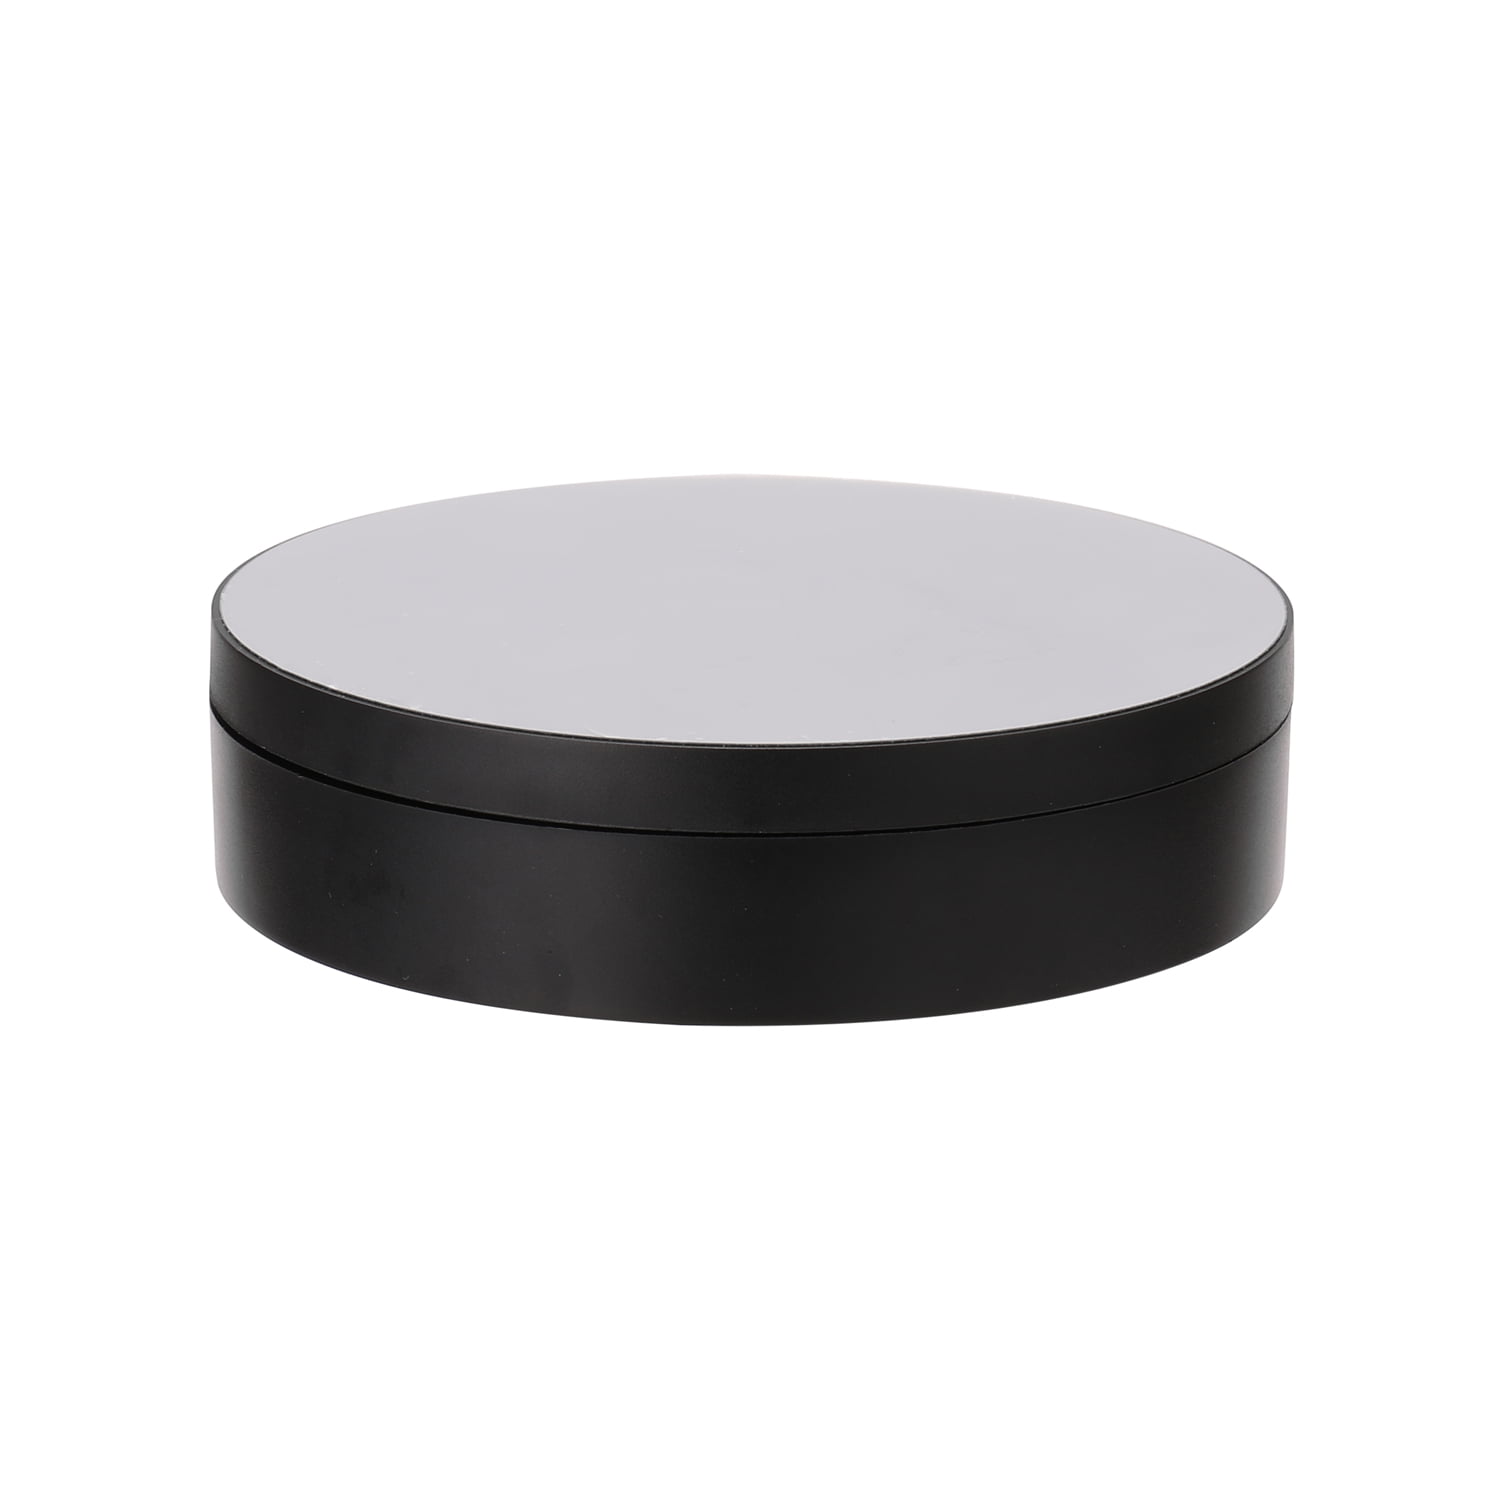 Details about   360 Degree Electric Rotating Turntable Display Stand for Photography Video M5B5 